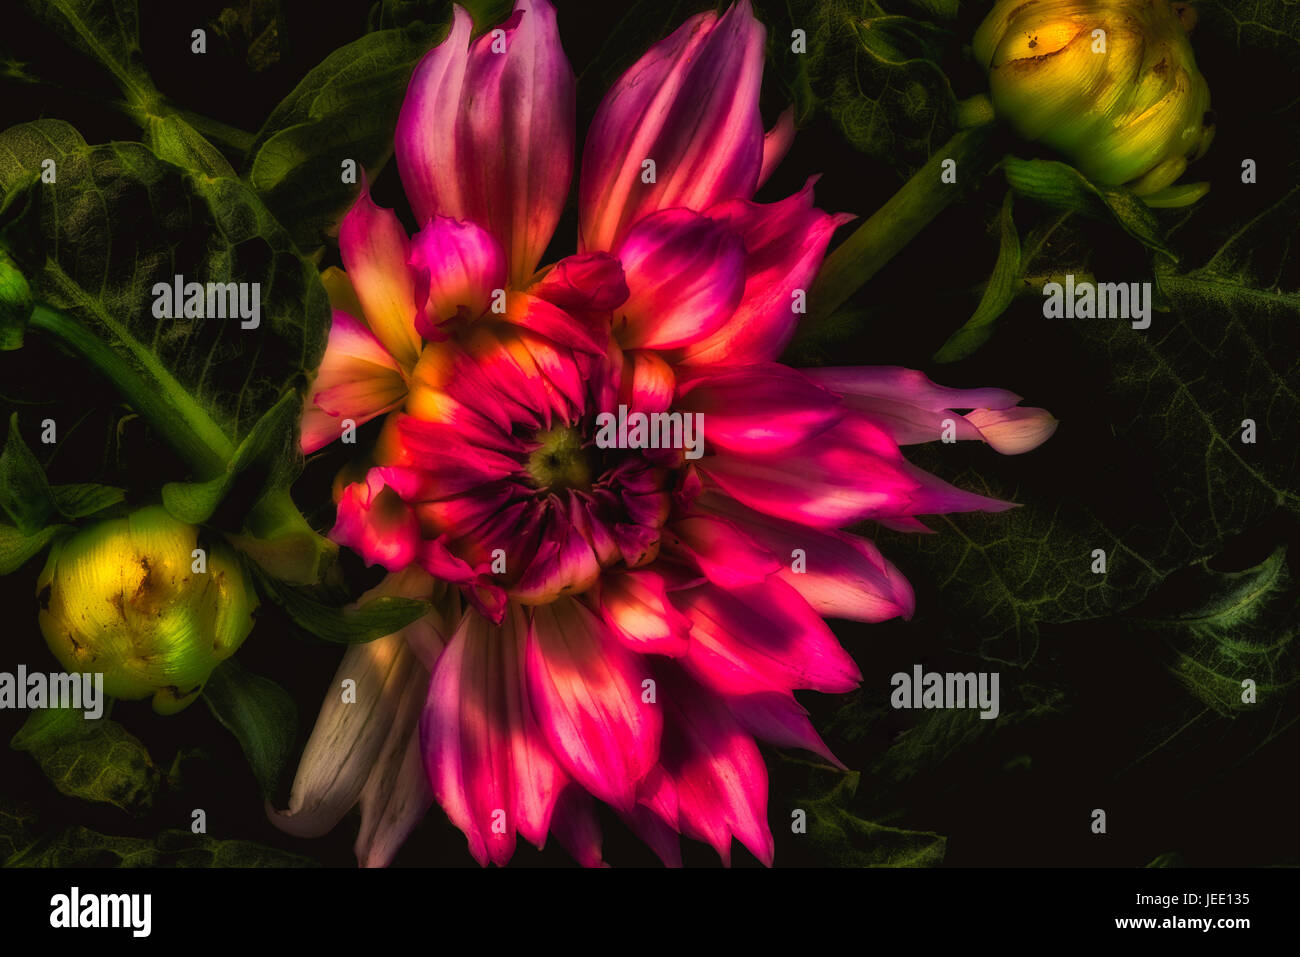 Surreal fine art color macro portrait of a flowering glowing red dahlia blossom, buds and leaves in a dreamlike surrealistic vintage painting style Stock Photo